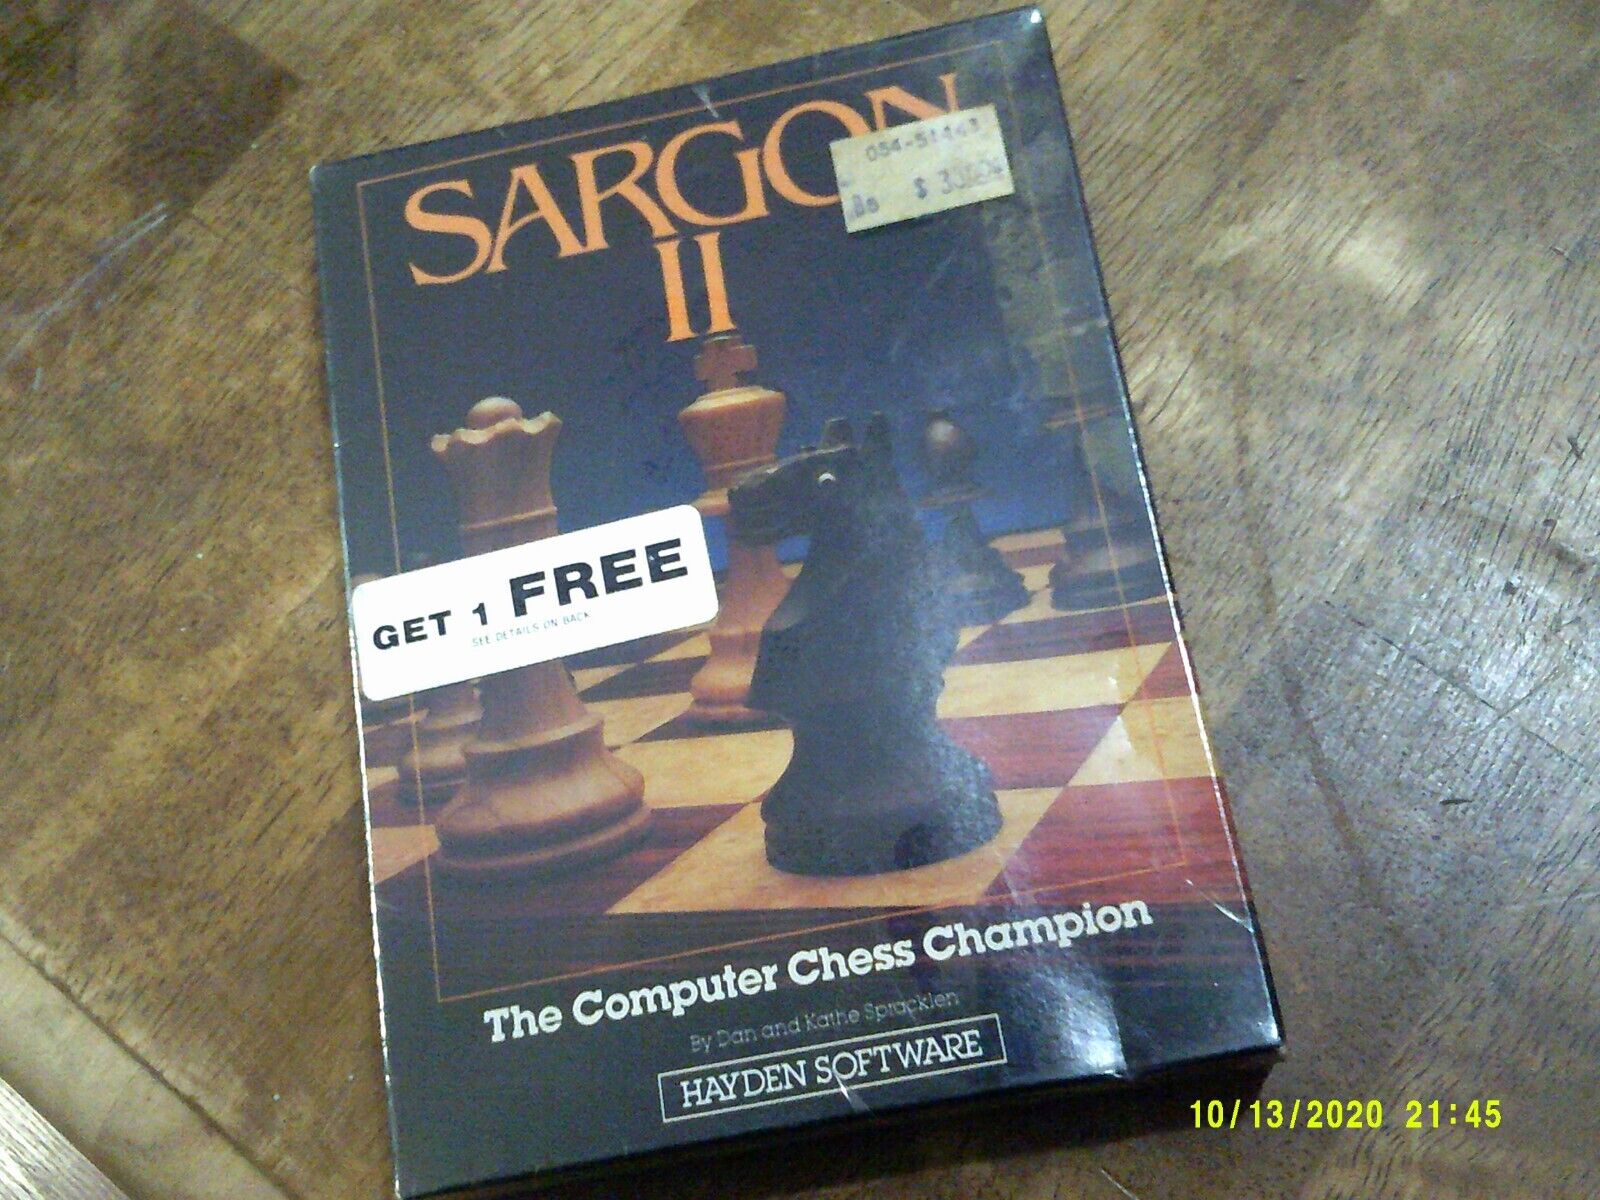 New Sealed  Sargon II Chess Game on 5.25 disk for Commodore 64 or Atari 800XL